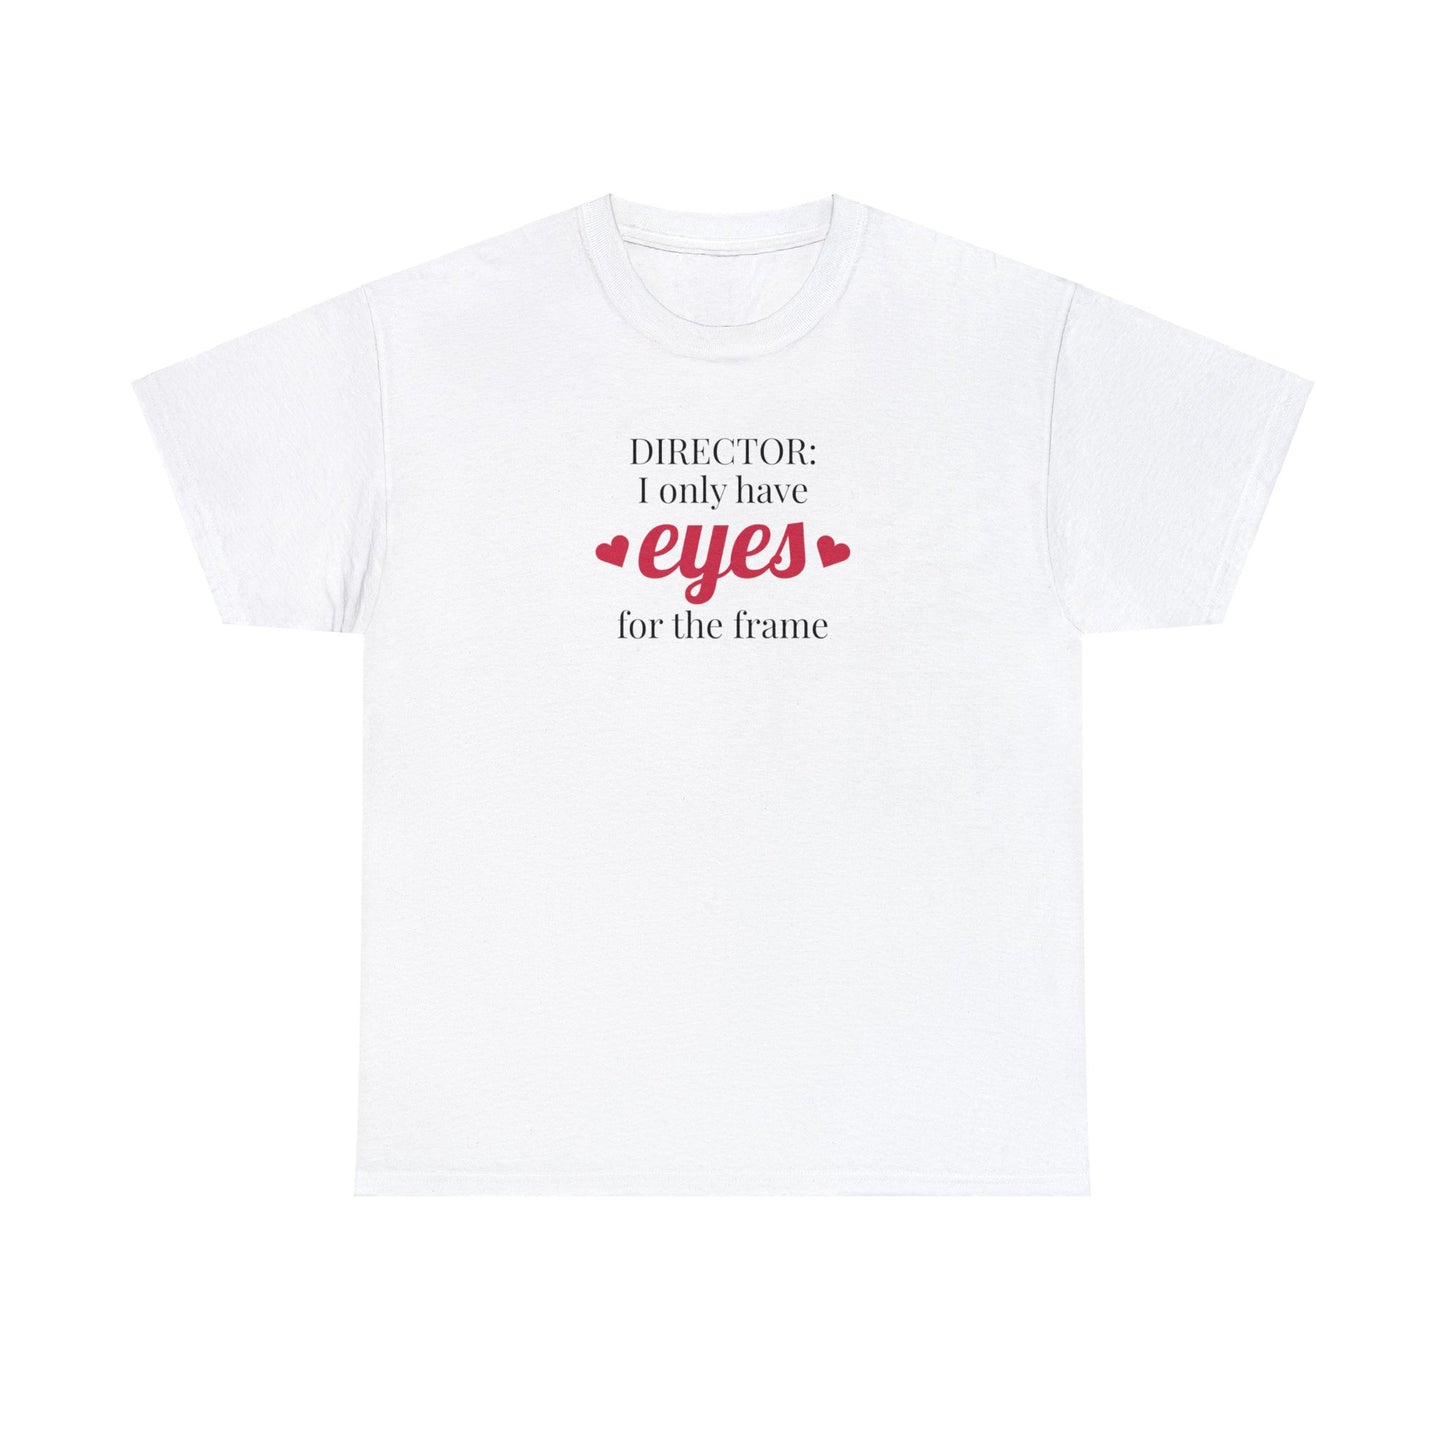 "DIRECTOR: I only have eyes for the frame" t-shirt